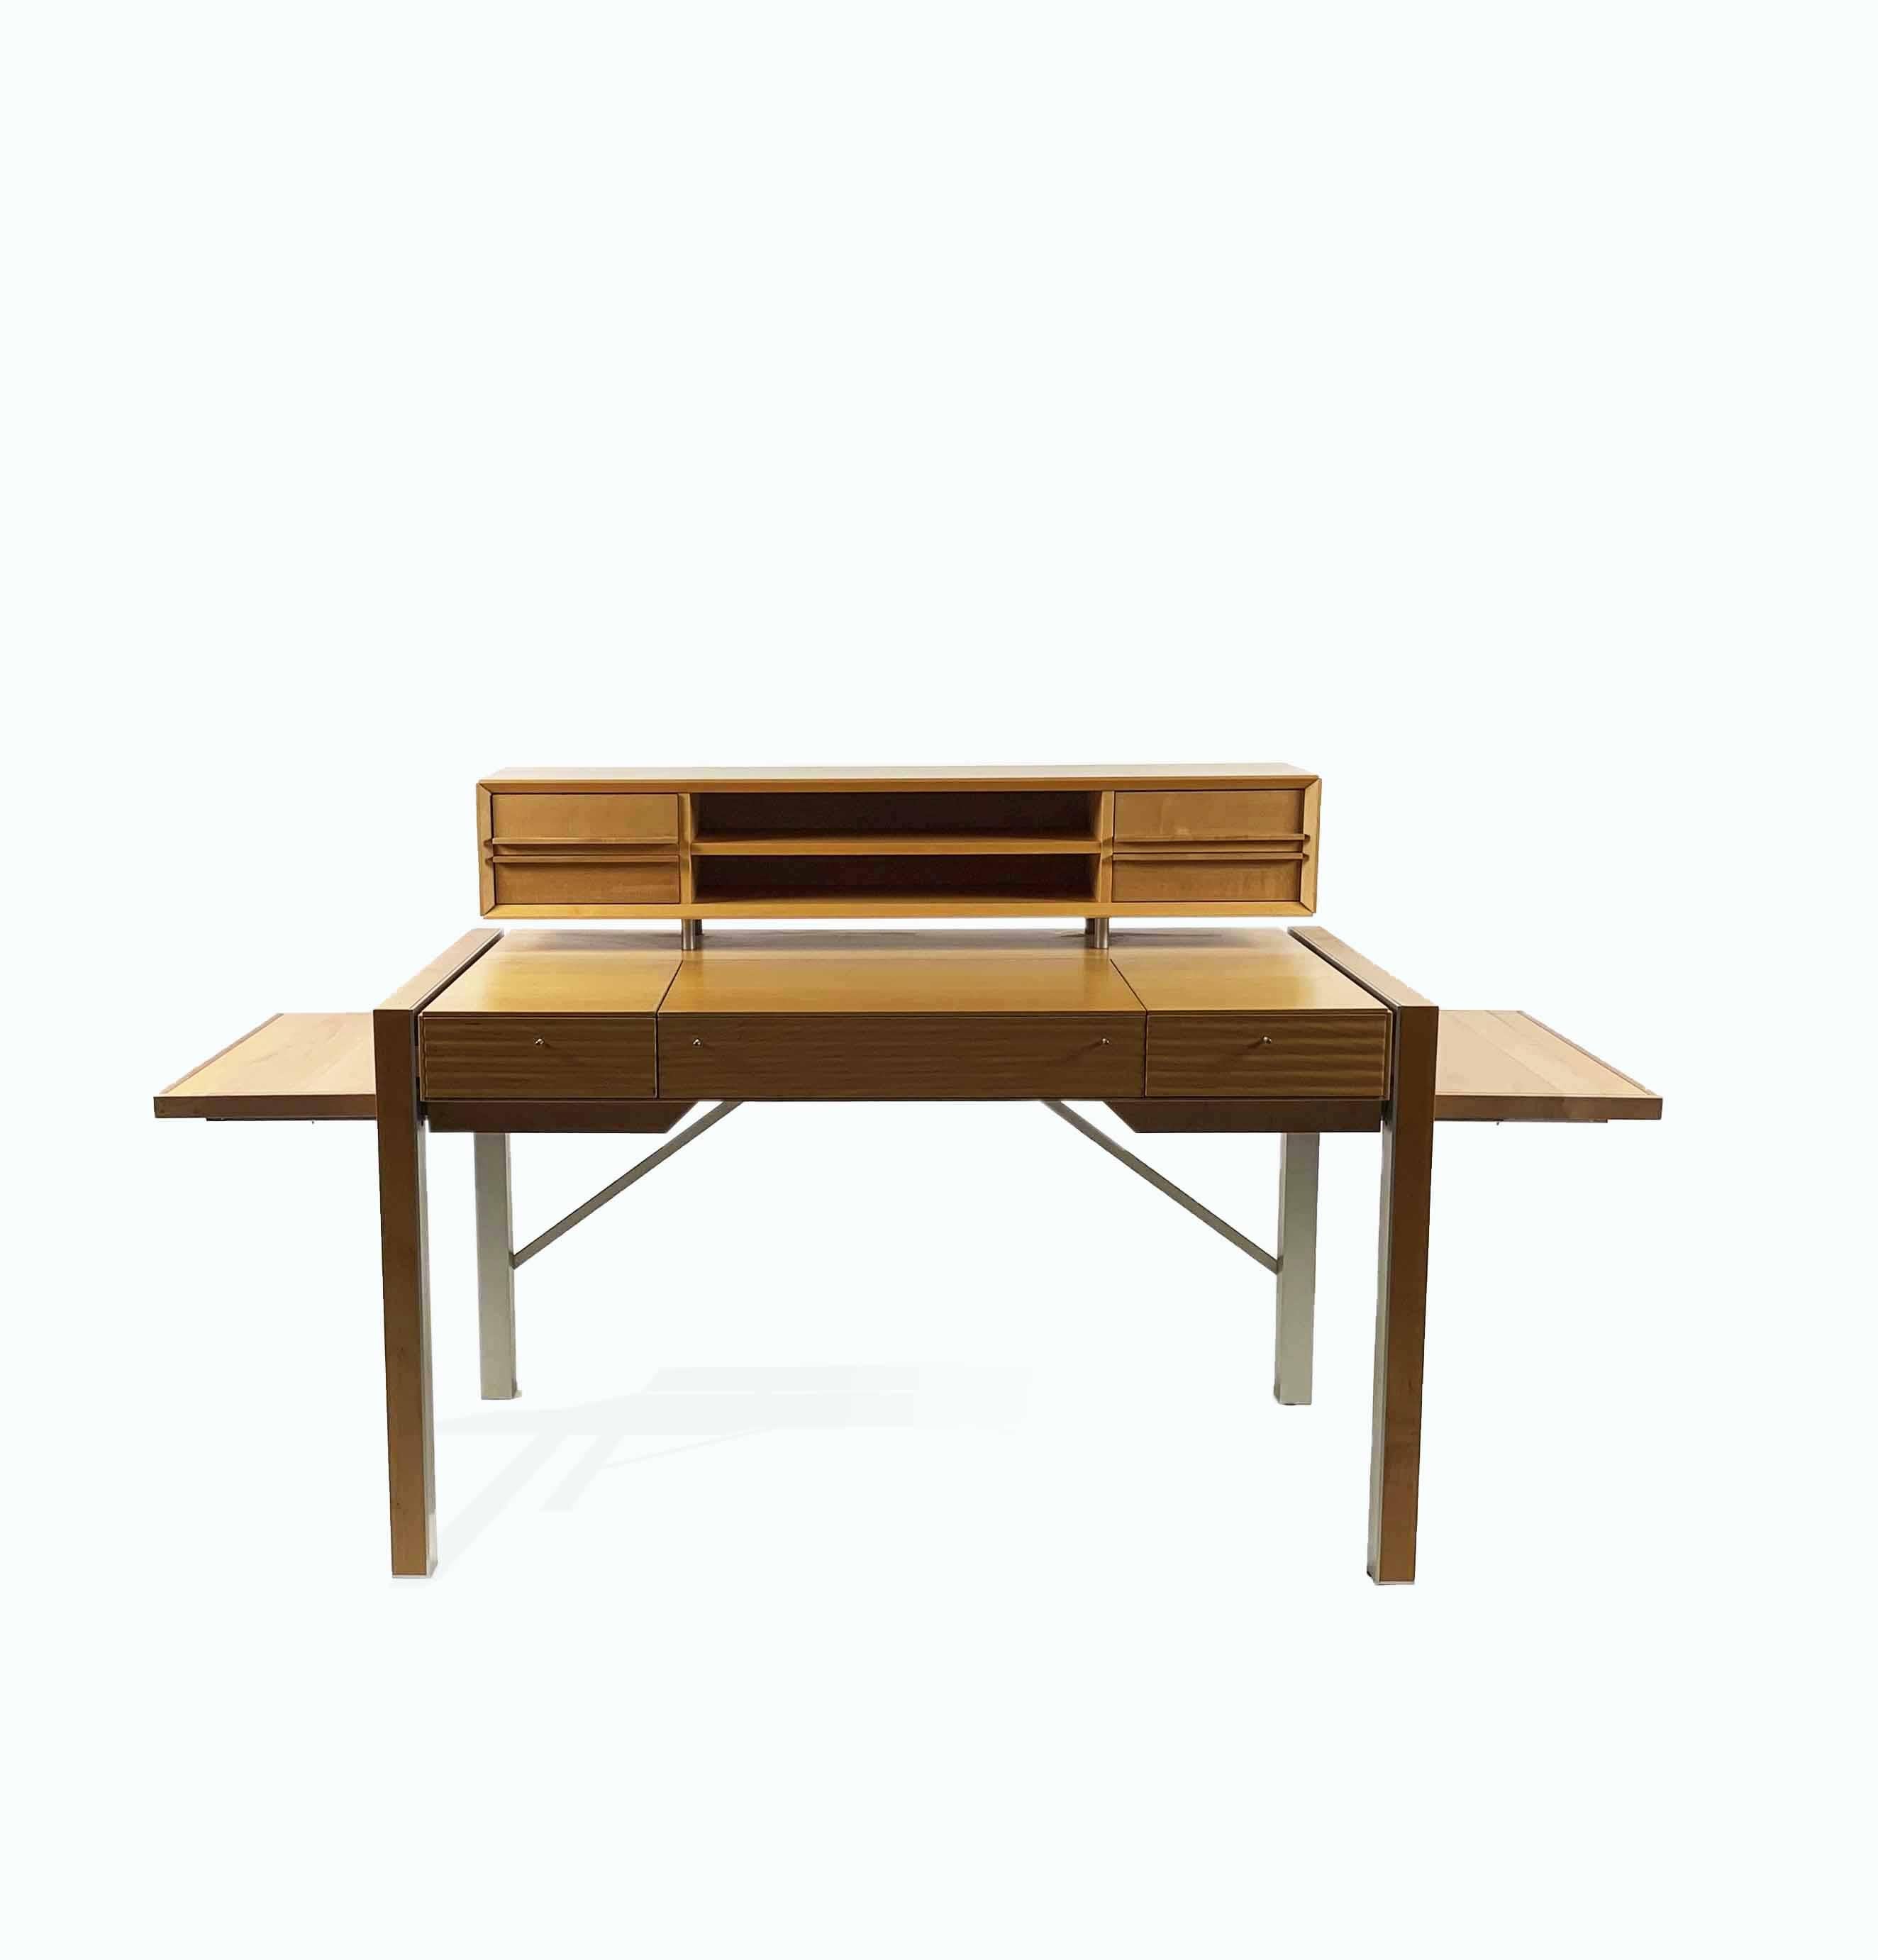 The Tracks writing desk, designed by Naghi Habib in 1999, is part of a product family created for Bernini, based on the concept of an elegant home that caters to the modern need for space rationalization. The Tracks writing desk is a minimal yet